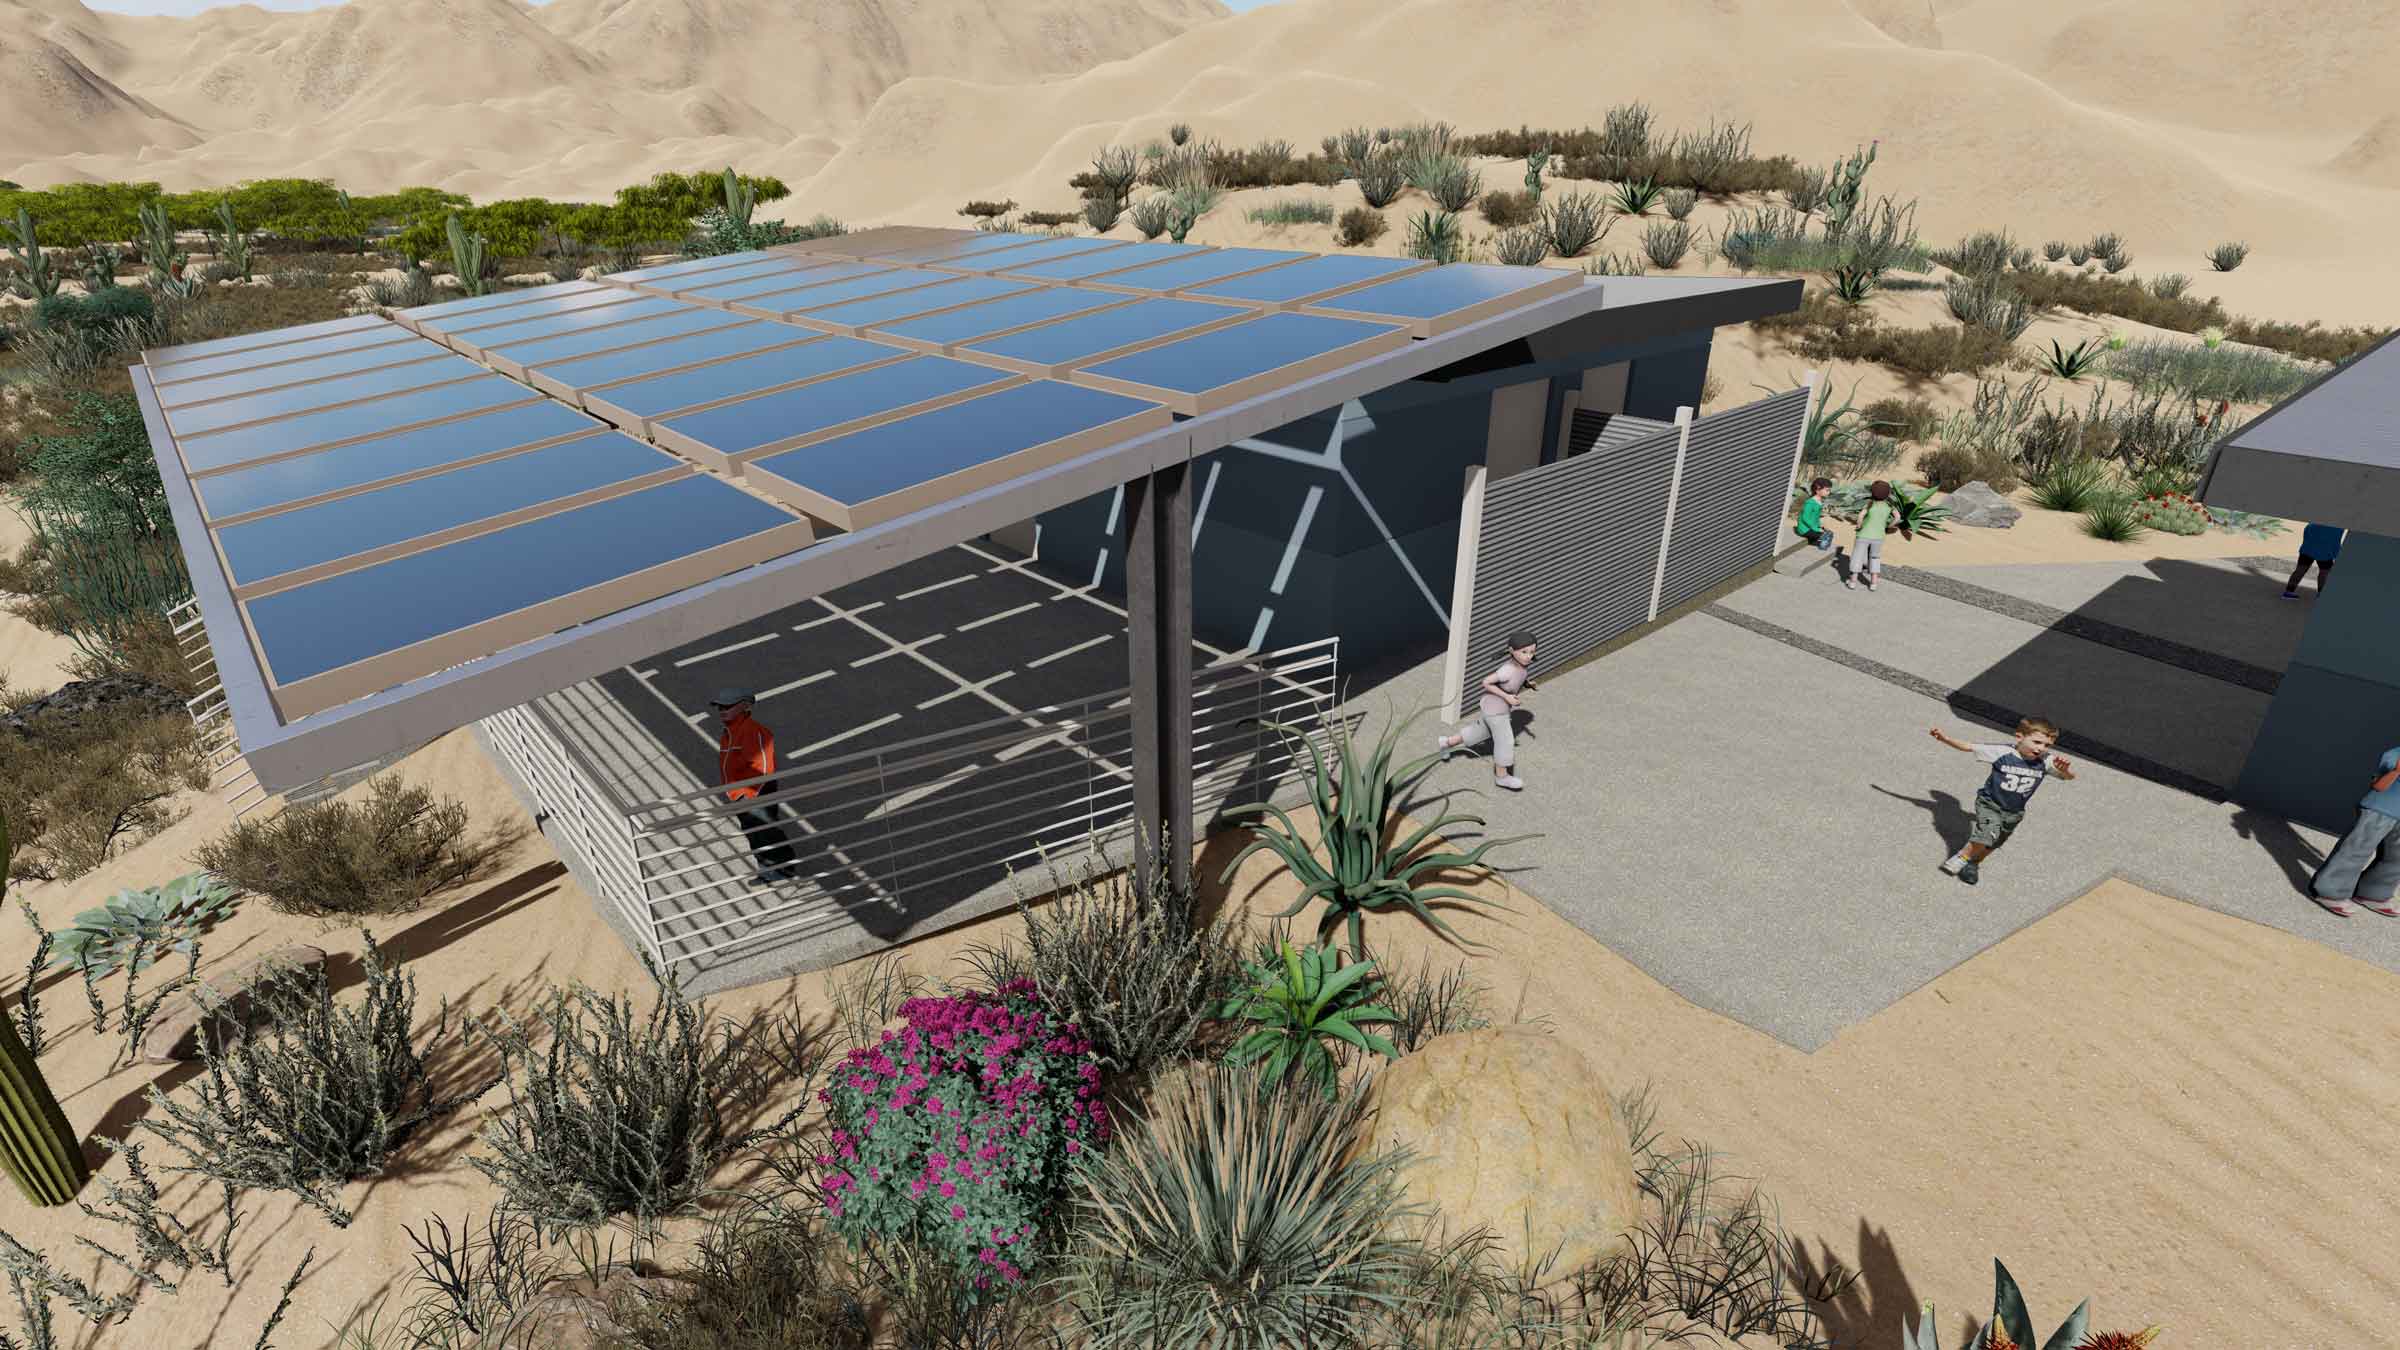 A solar shaded classroom adjoins one of the buildings acting as a teaching center and desert gateway